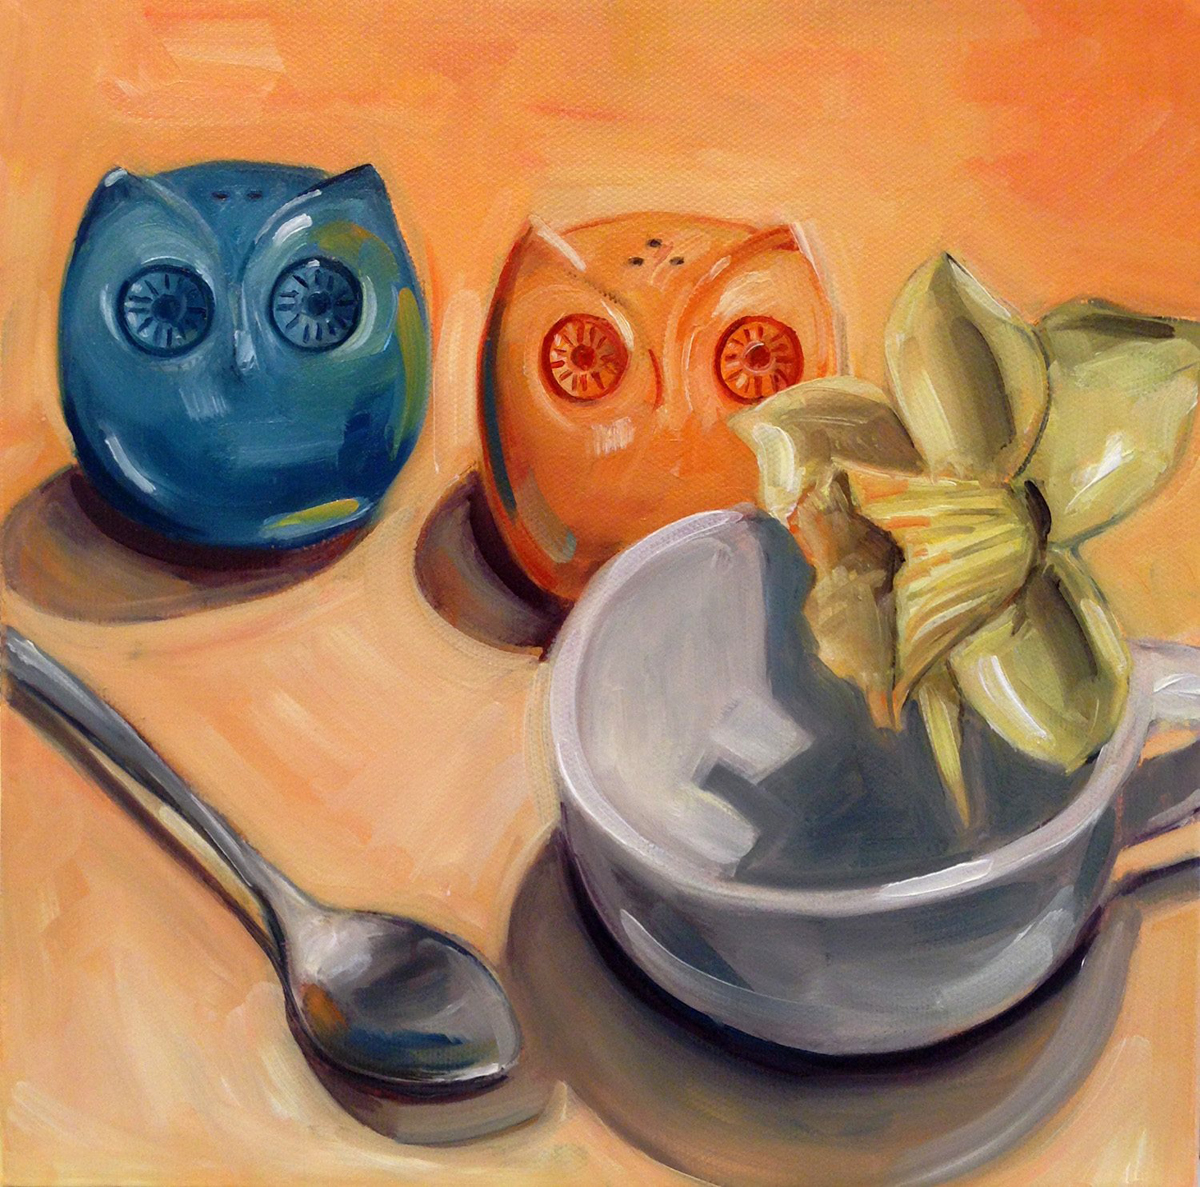 Painting of a cup, yellow flower, and owl shaped salt and pepper shakers.